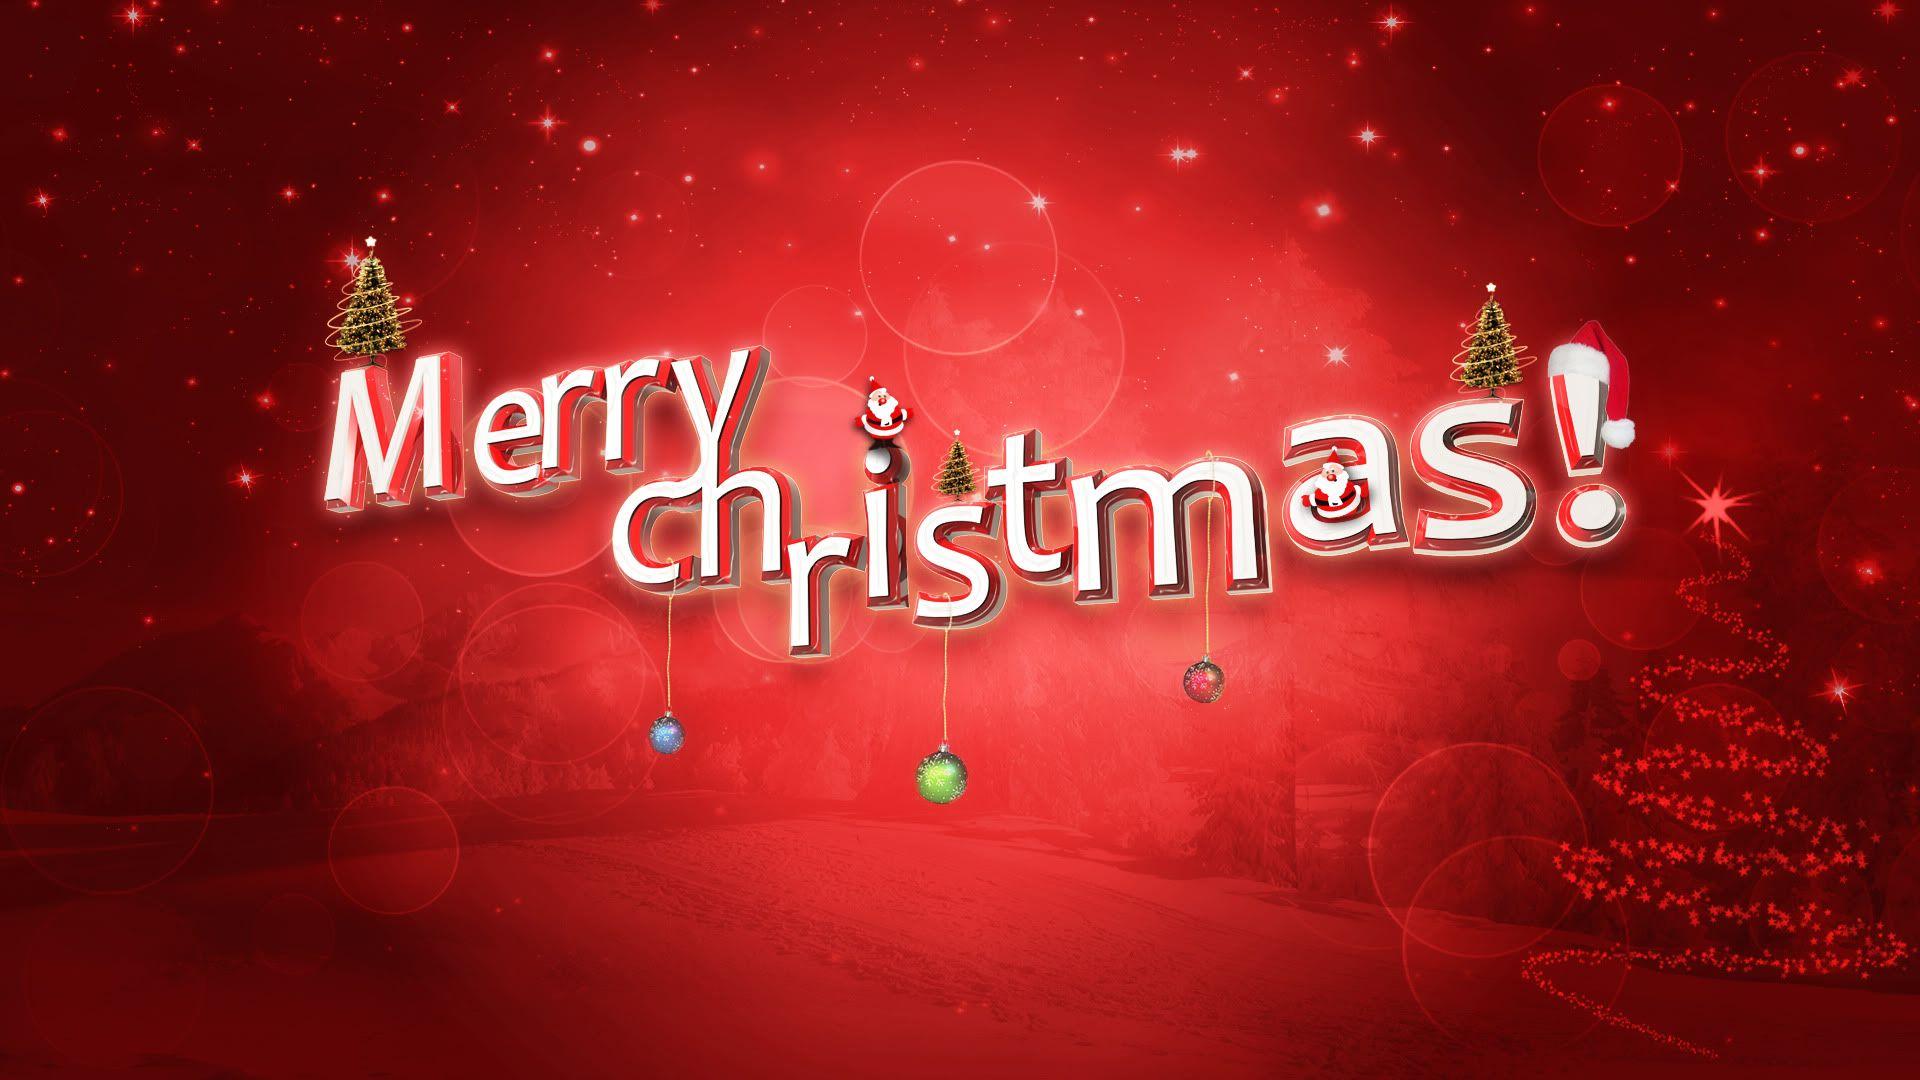 Merry Christmas Image 2020 Picture Photo Pics Wallpaper Download